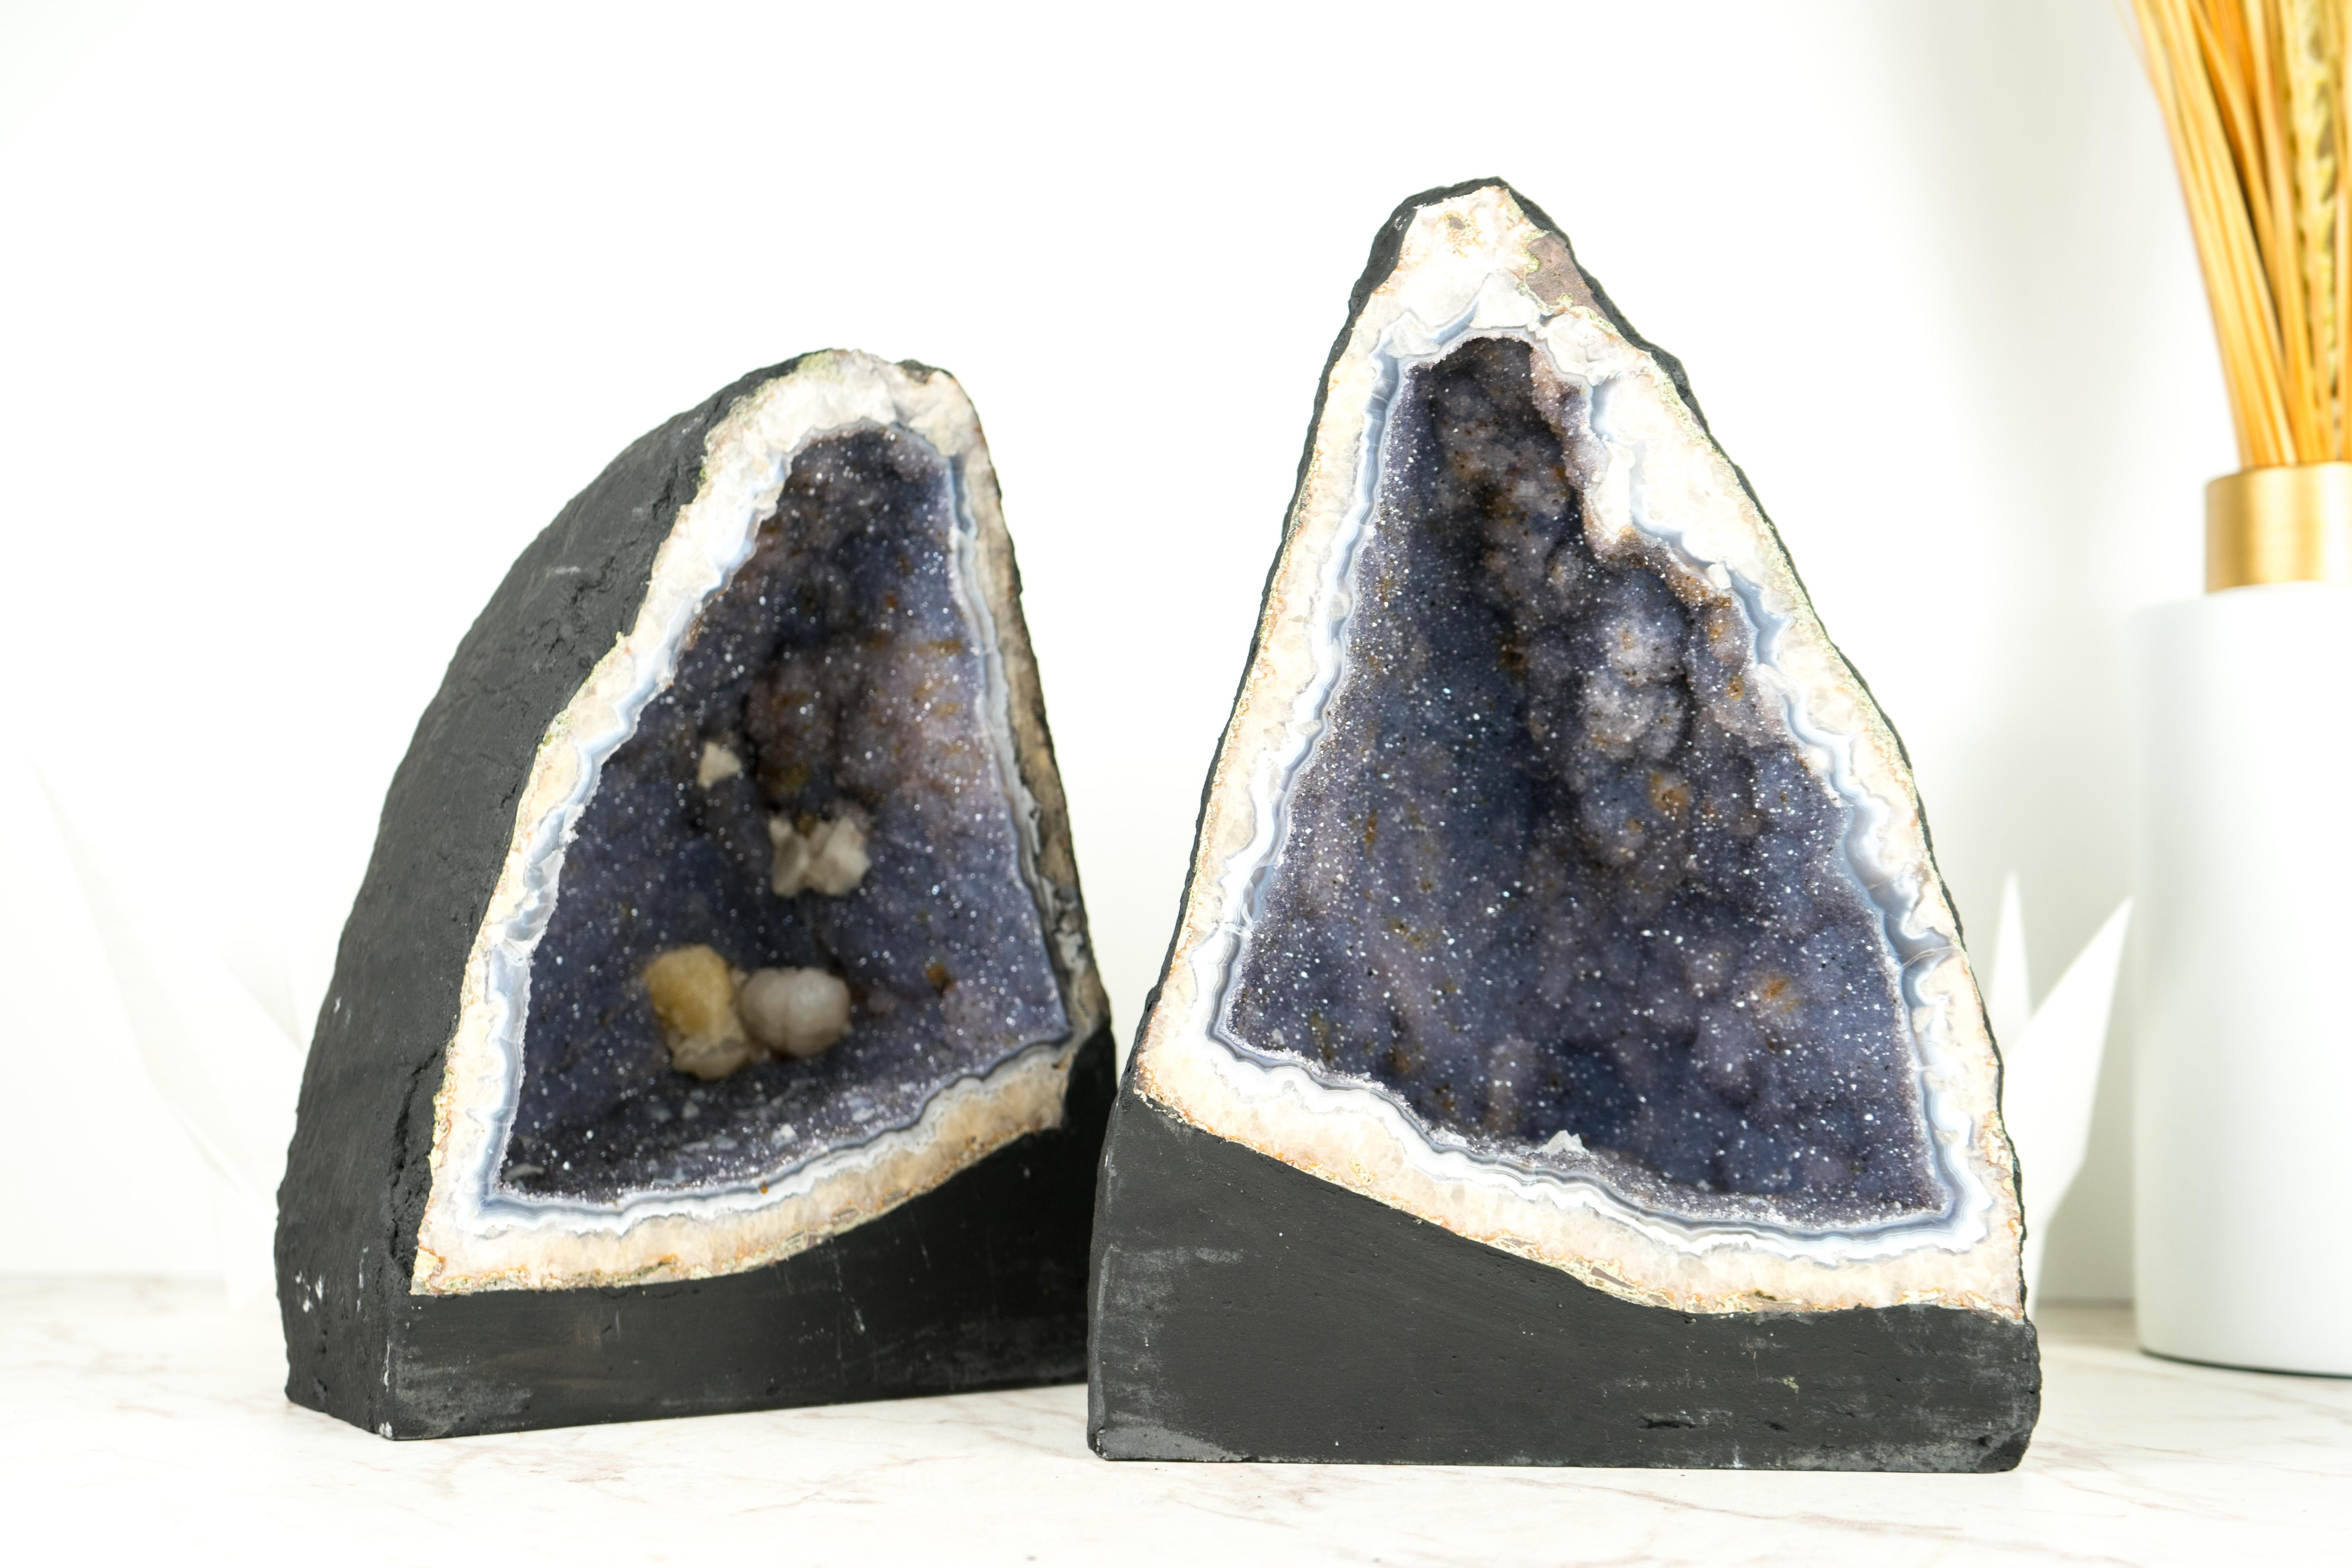 Pair of Blue Lace Agate Geodes with Lavender Amethyst Druzy, Rare Sparkly Geodes For Sale 4